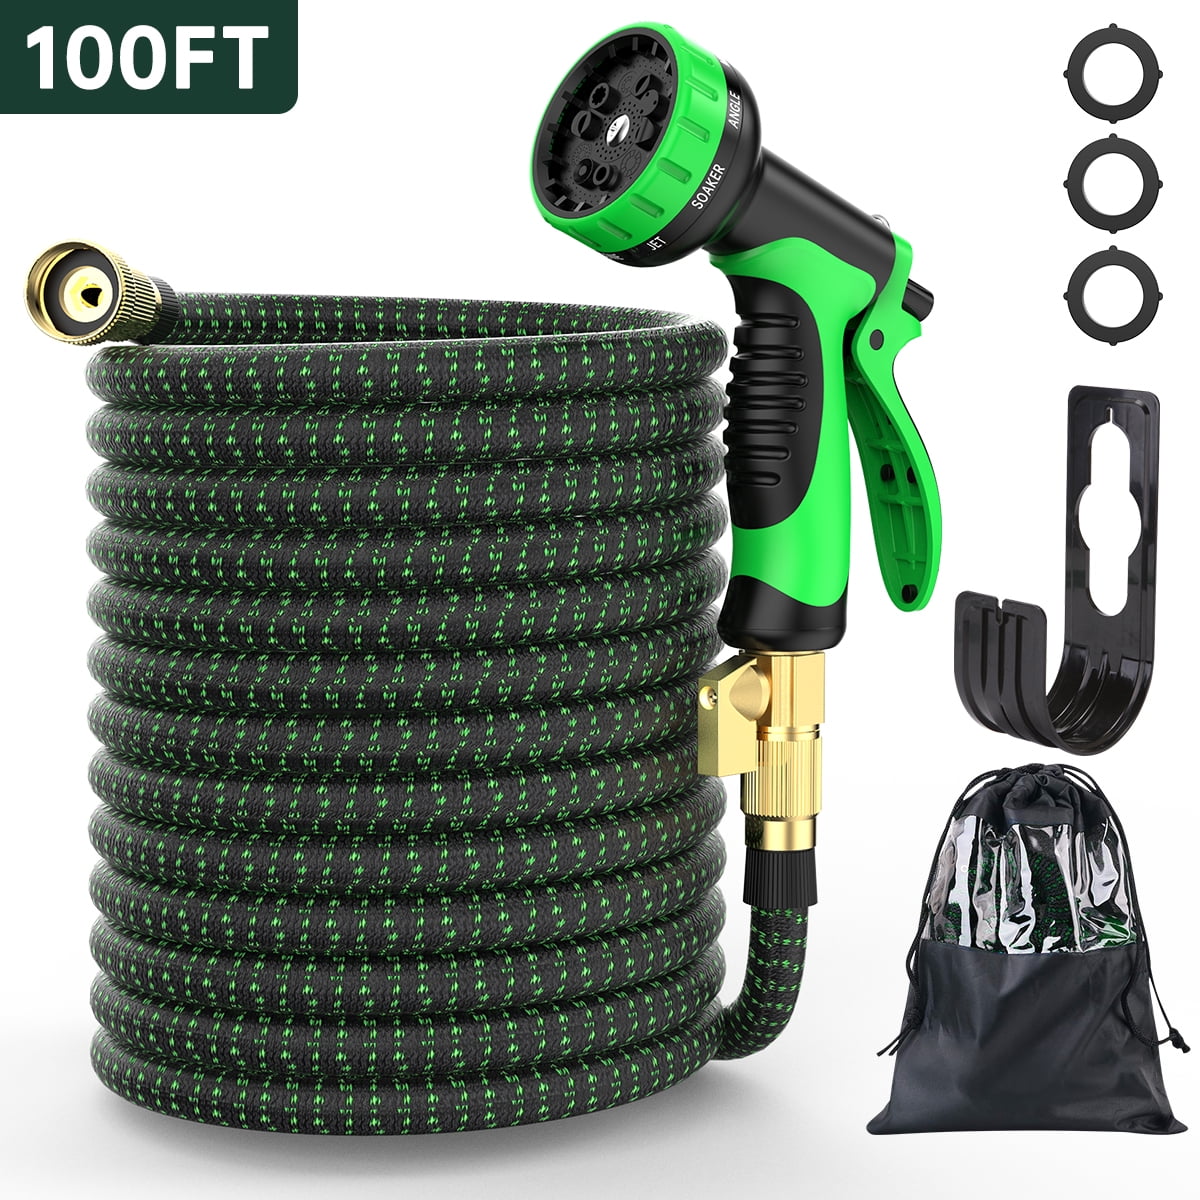 10m long garden hose heavy duty hosepipe braded and connectors SALE 